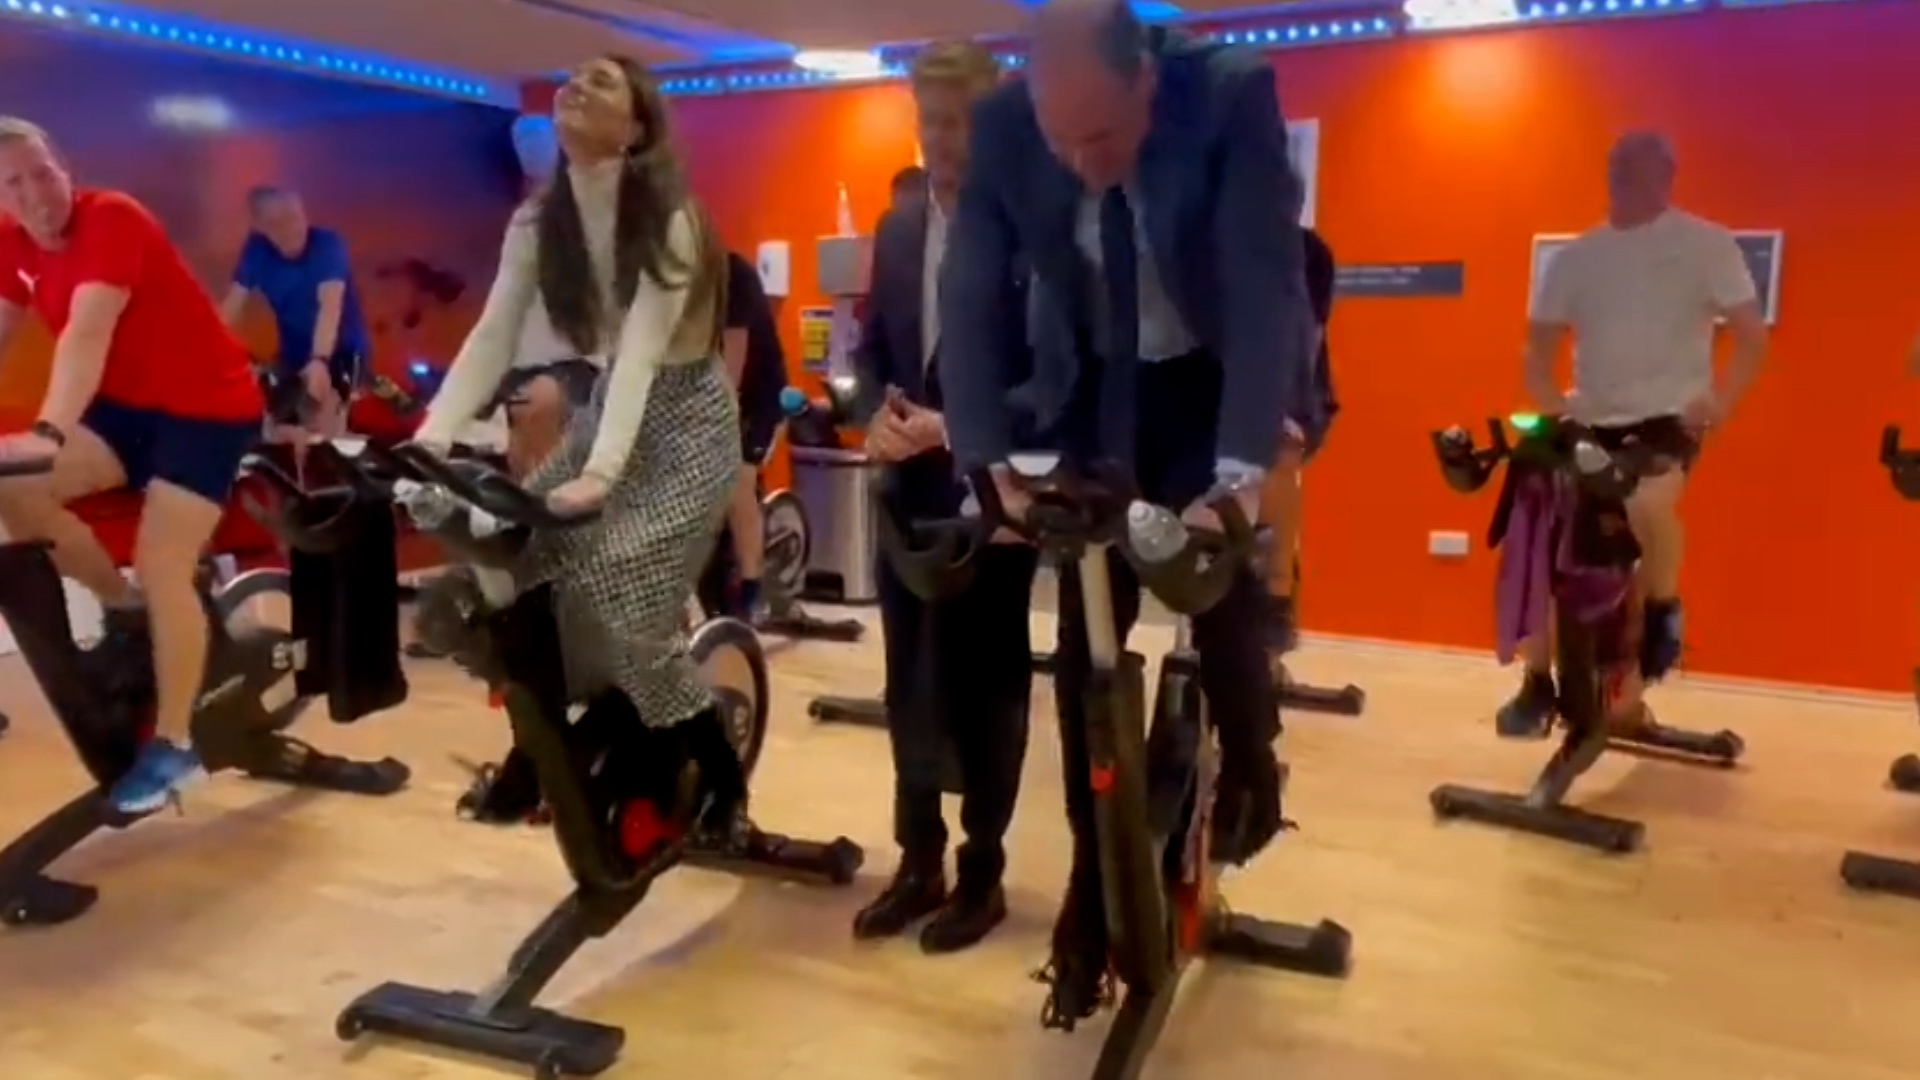 Kate Middleton humiliates Prince William by beating him in a bike race wearing high heels